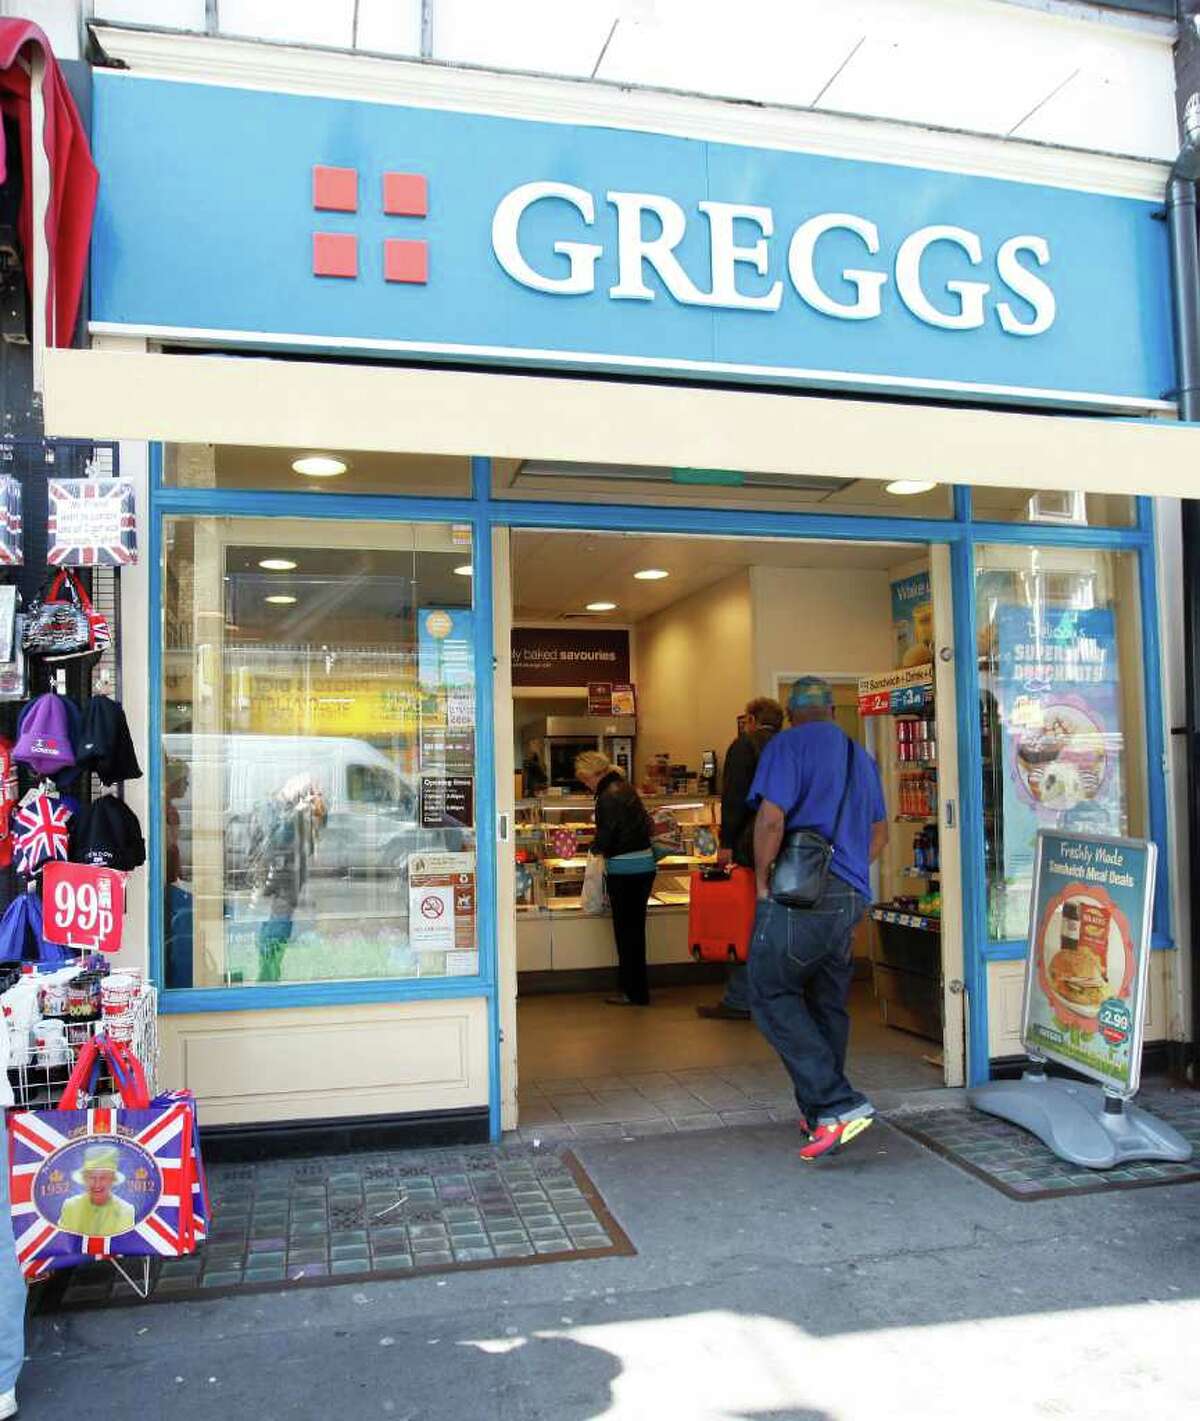 A man walks into a branch of Greggs - a chain of bakers and makers of snack food in London, Wednesday, March, 28, 2012. The boss of Greggs has accused Britain's Chancellor of the Exchequer, George Osborne, of having "lost touch" after the Chancellor admitted he could not remember the last time he bought a pasty from the baker. Chief executive Ken McMeikan said ministers did not appreciate the impact changes to VAT rules would have on ordinary people. The high street chain saw millions wiped off its shares after the Budget closed a loophole that has meant some hot takeaway foods, such as sausage rolls and pasties, escaped the duty. The move - quickly dubbed the "pie tax" - sparked outrage, with critics pointing to the contrast of a cut in the 50p top tax rate. (AP Photo/Alastair Grant)